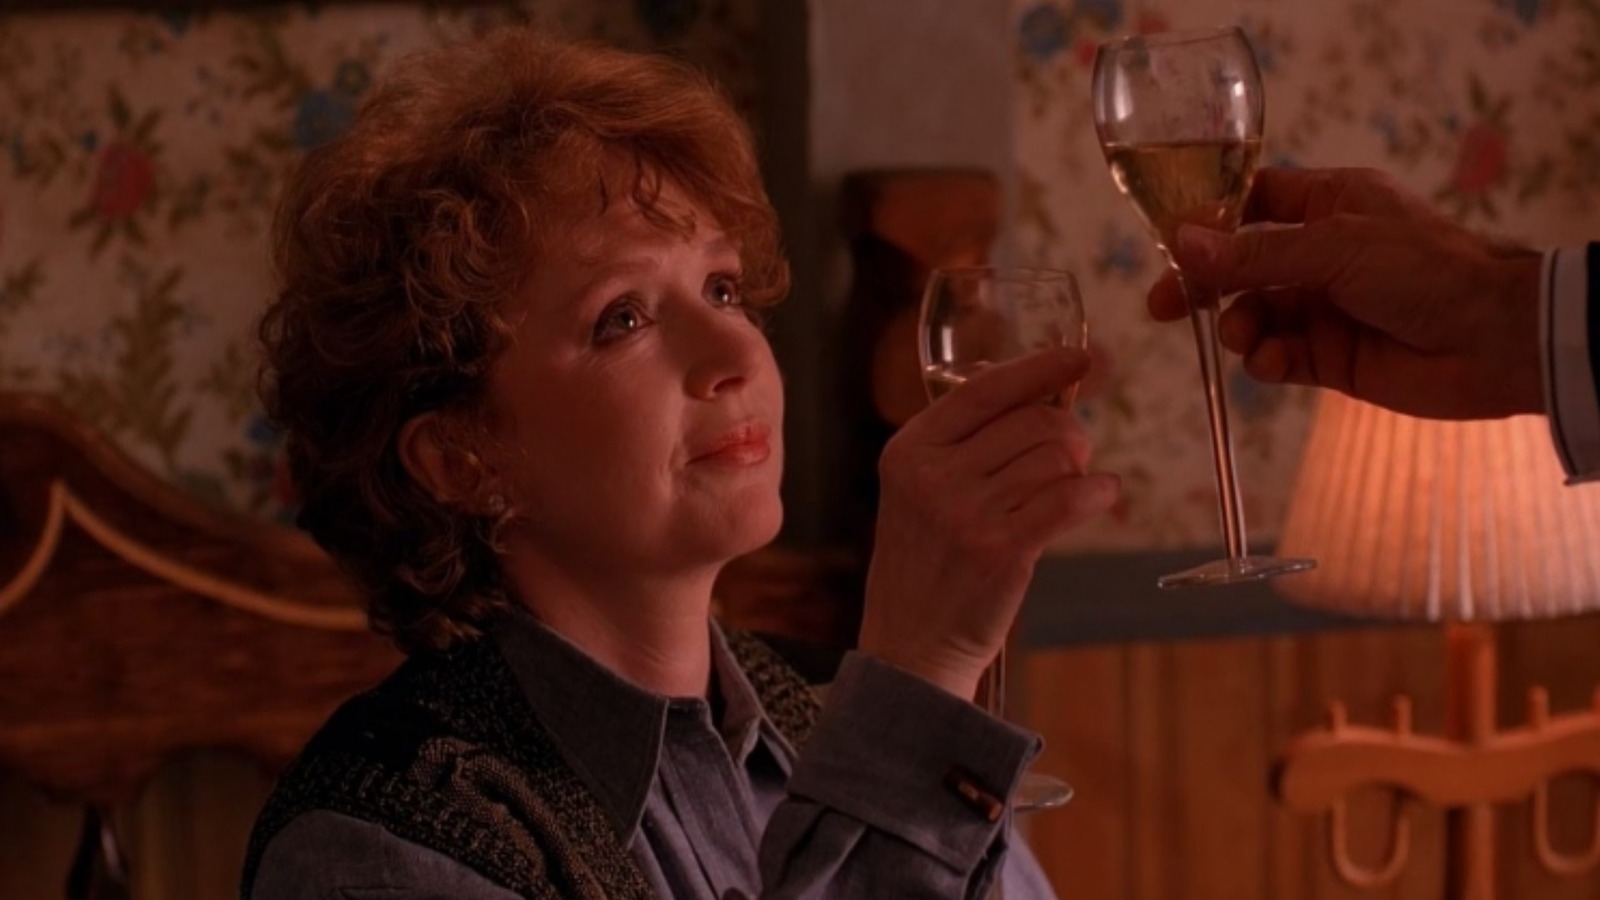 Piper Laurie Oscar Nominated Star Of Carrie And Twin Peaks Has Died At 91